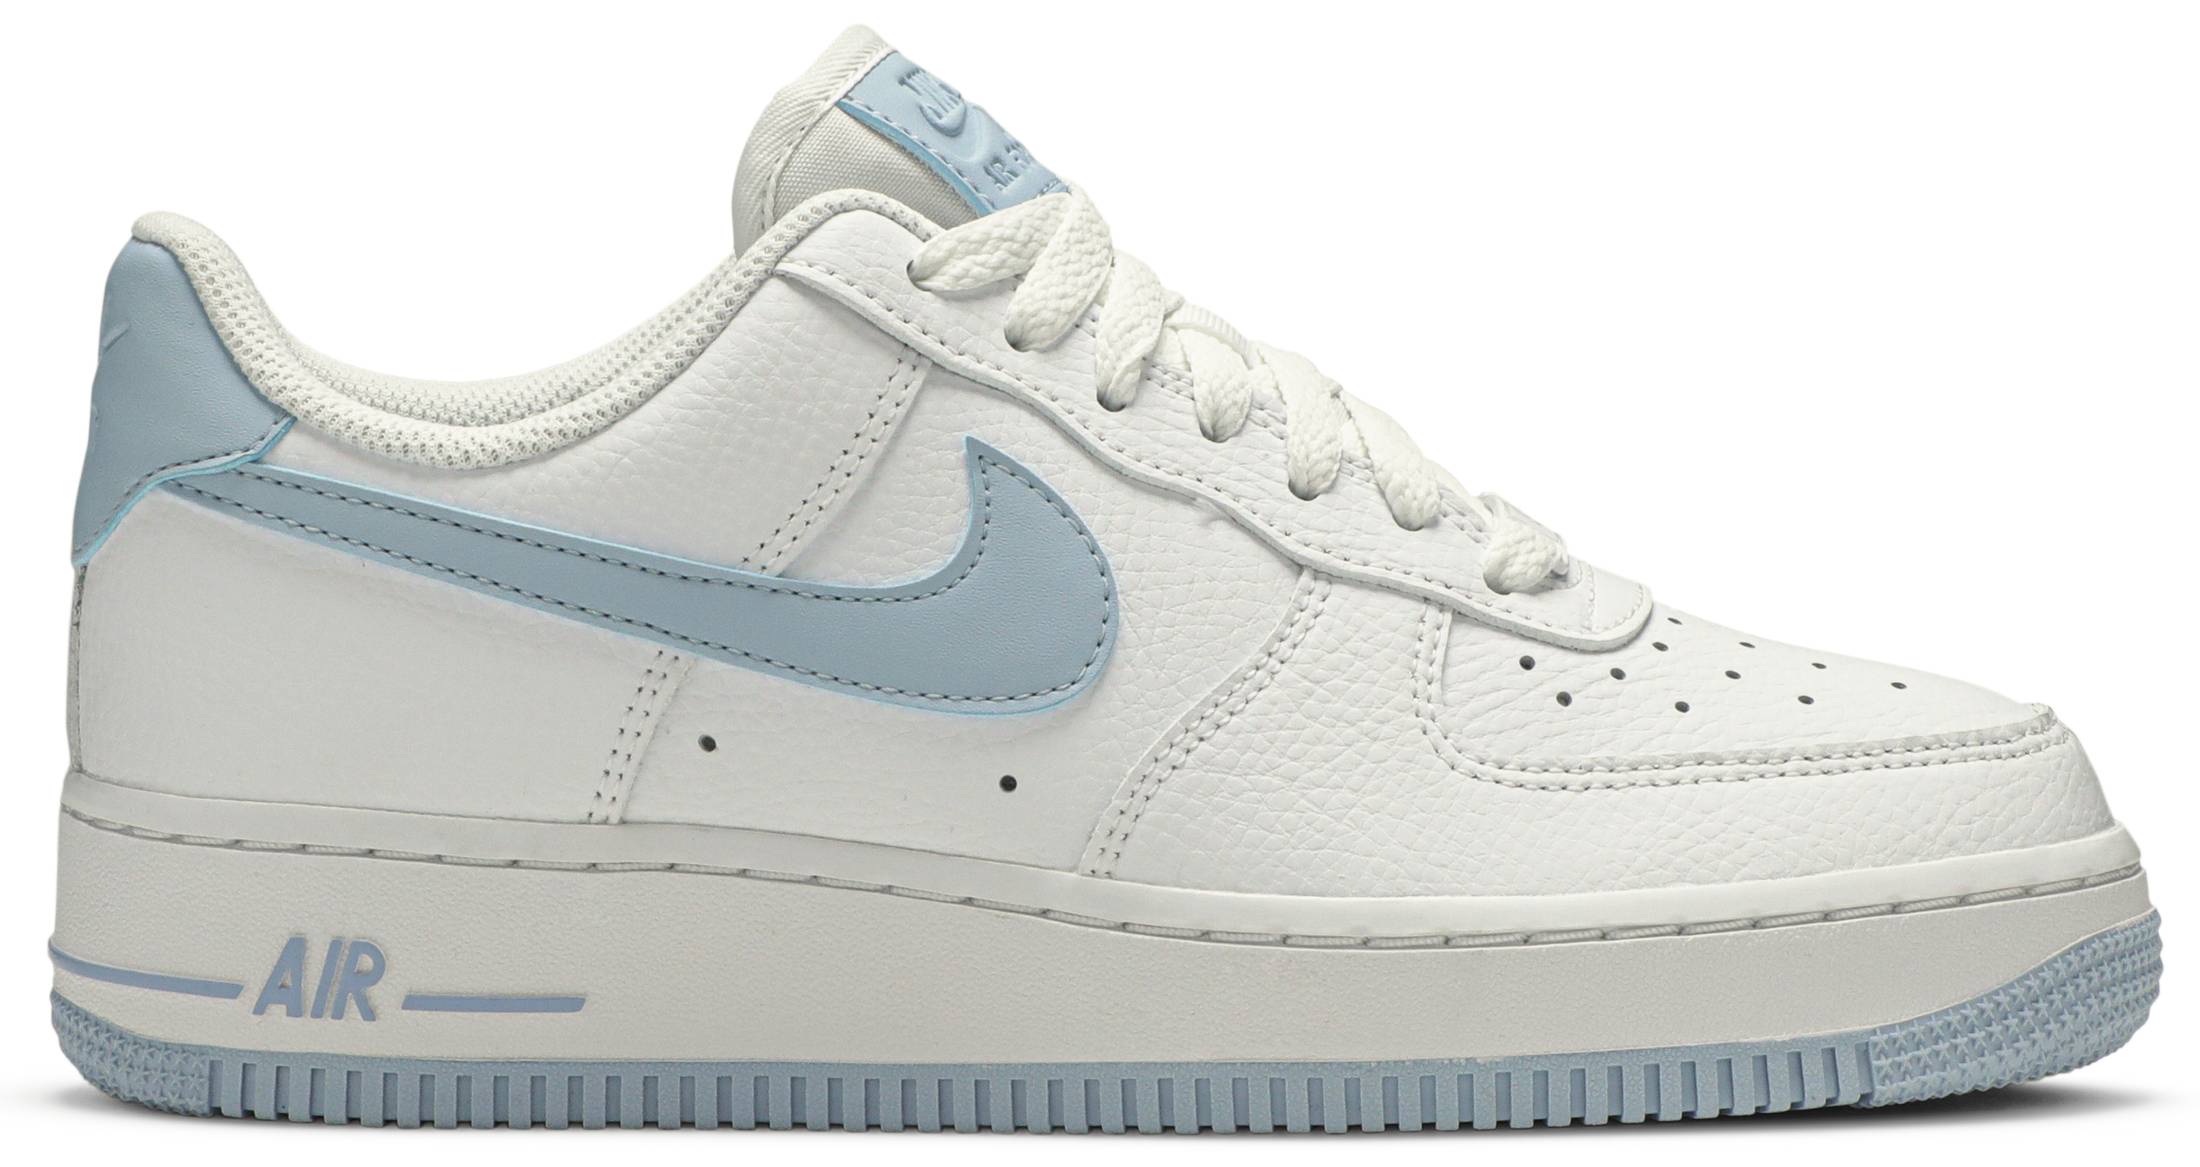 Wmns Air Force 1 Low '07 Patent 'Light Armory Blue' Nike AH0287 104